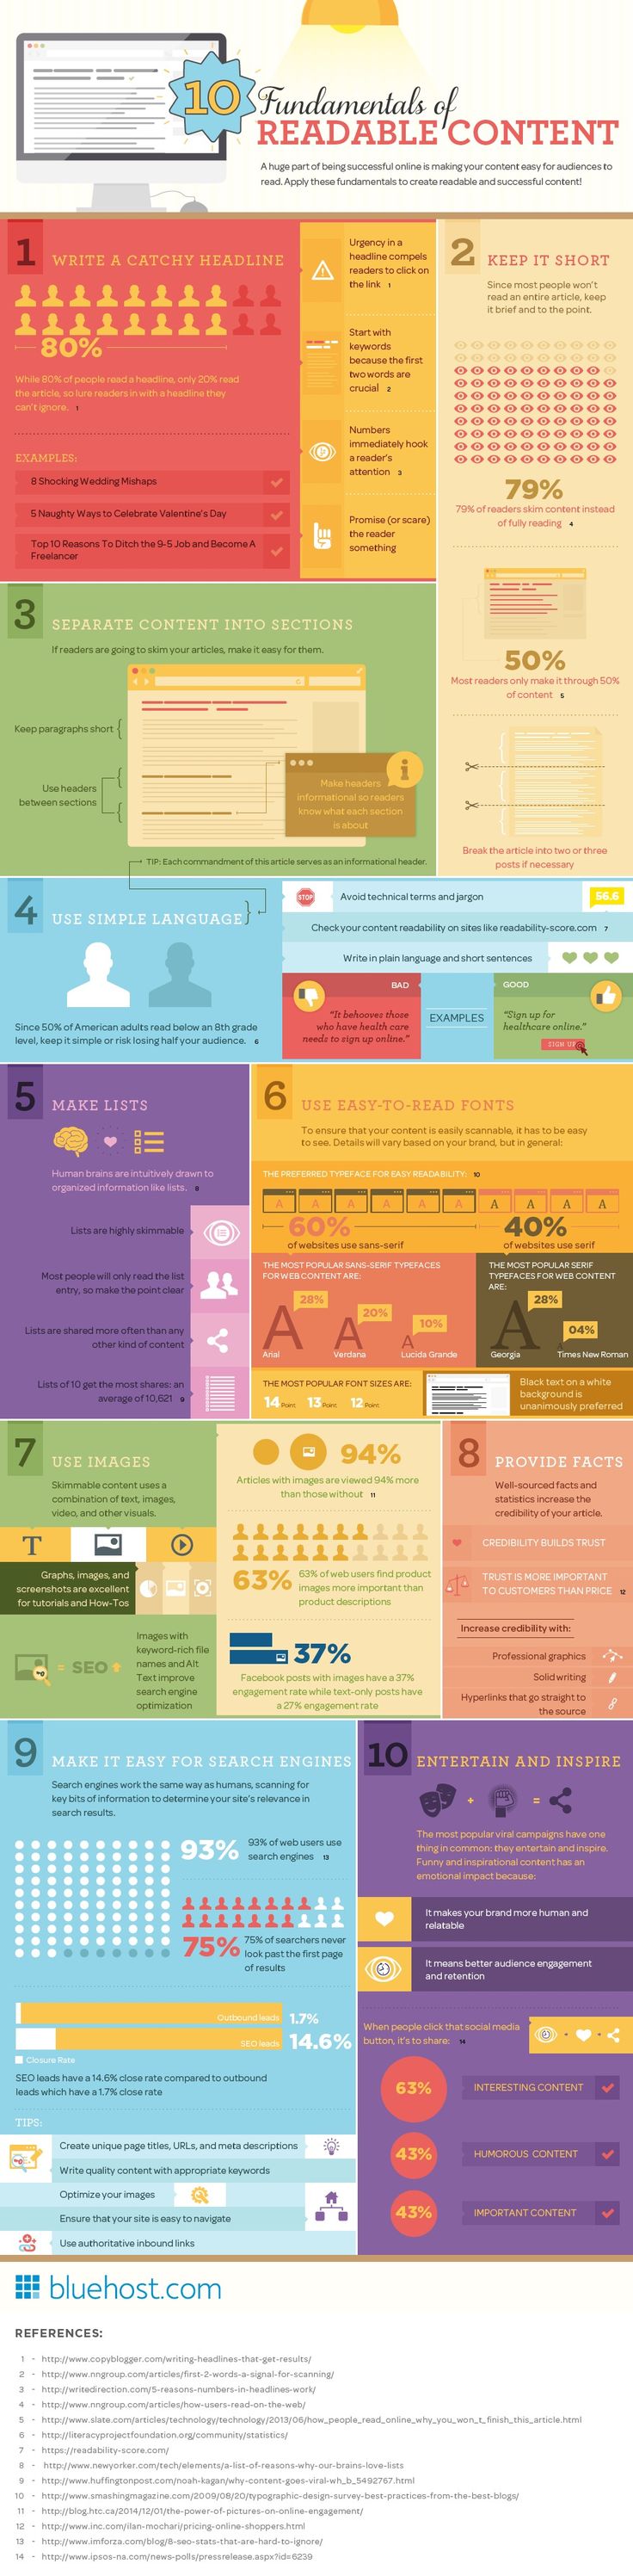 1532503228_368_Marketing-Infographic-Content-Marketing-Tips-10-Fundamentals-Of-Readable-Content-infographic Marketing Infographic : Content Marketing Tips: 10 Fundamentals Of Readable Content - infographic